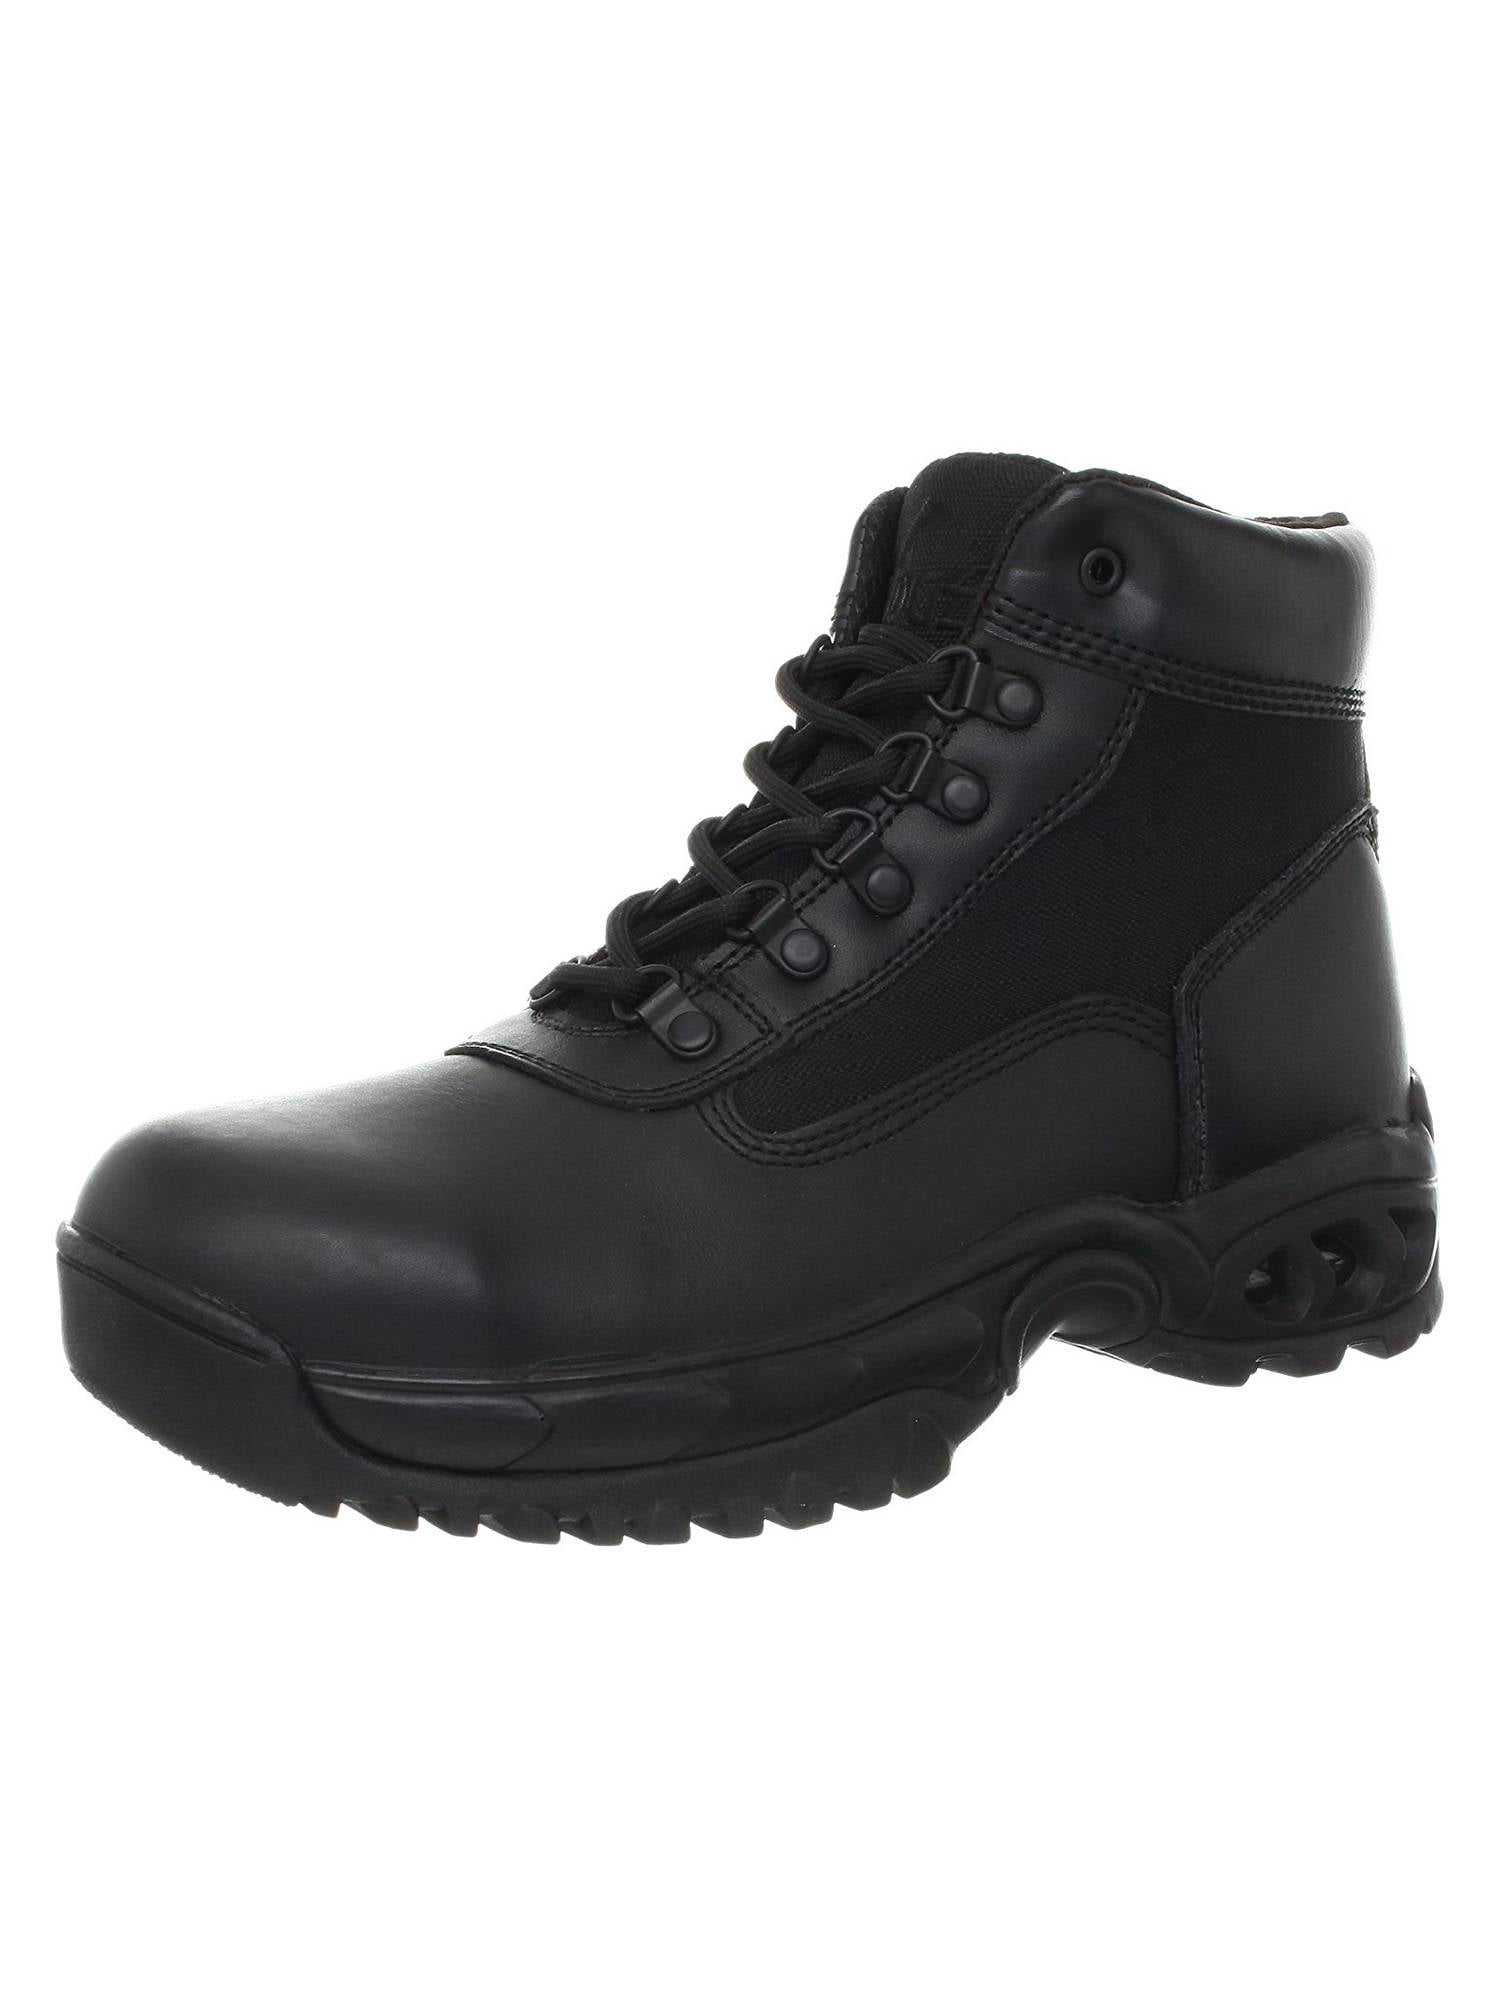 ARMA S3 Warrior Mens Black Leather Steel Toe Cap Safety Combat Side Zip Boots 